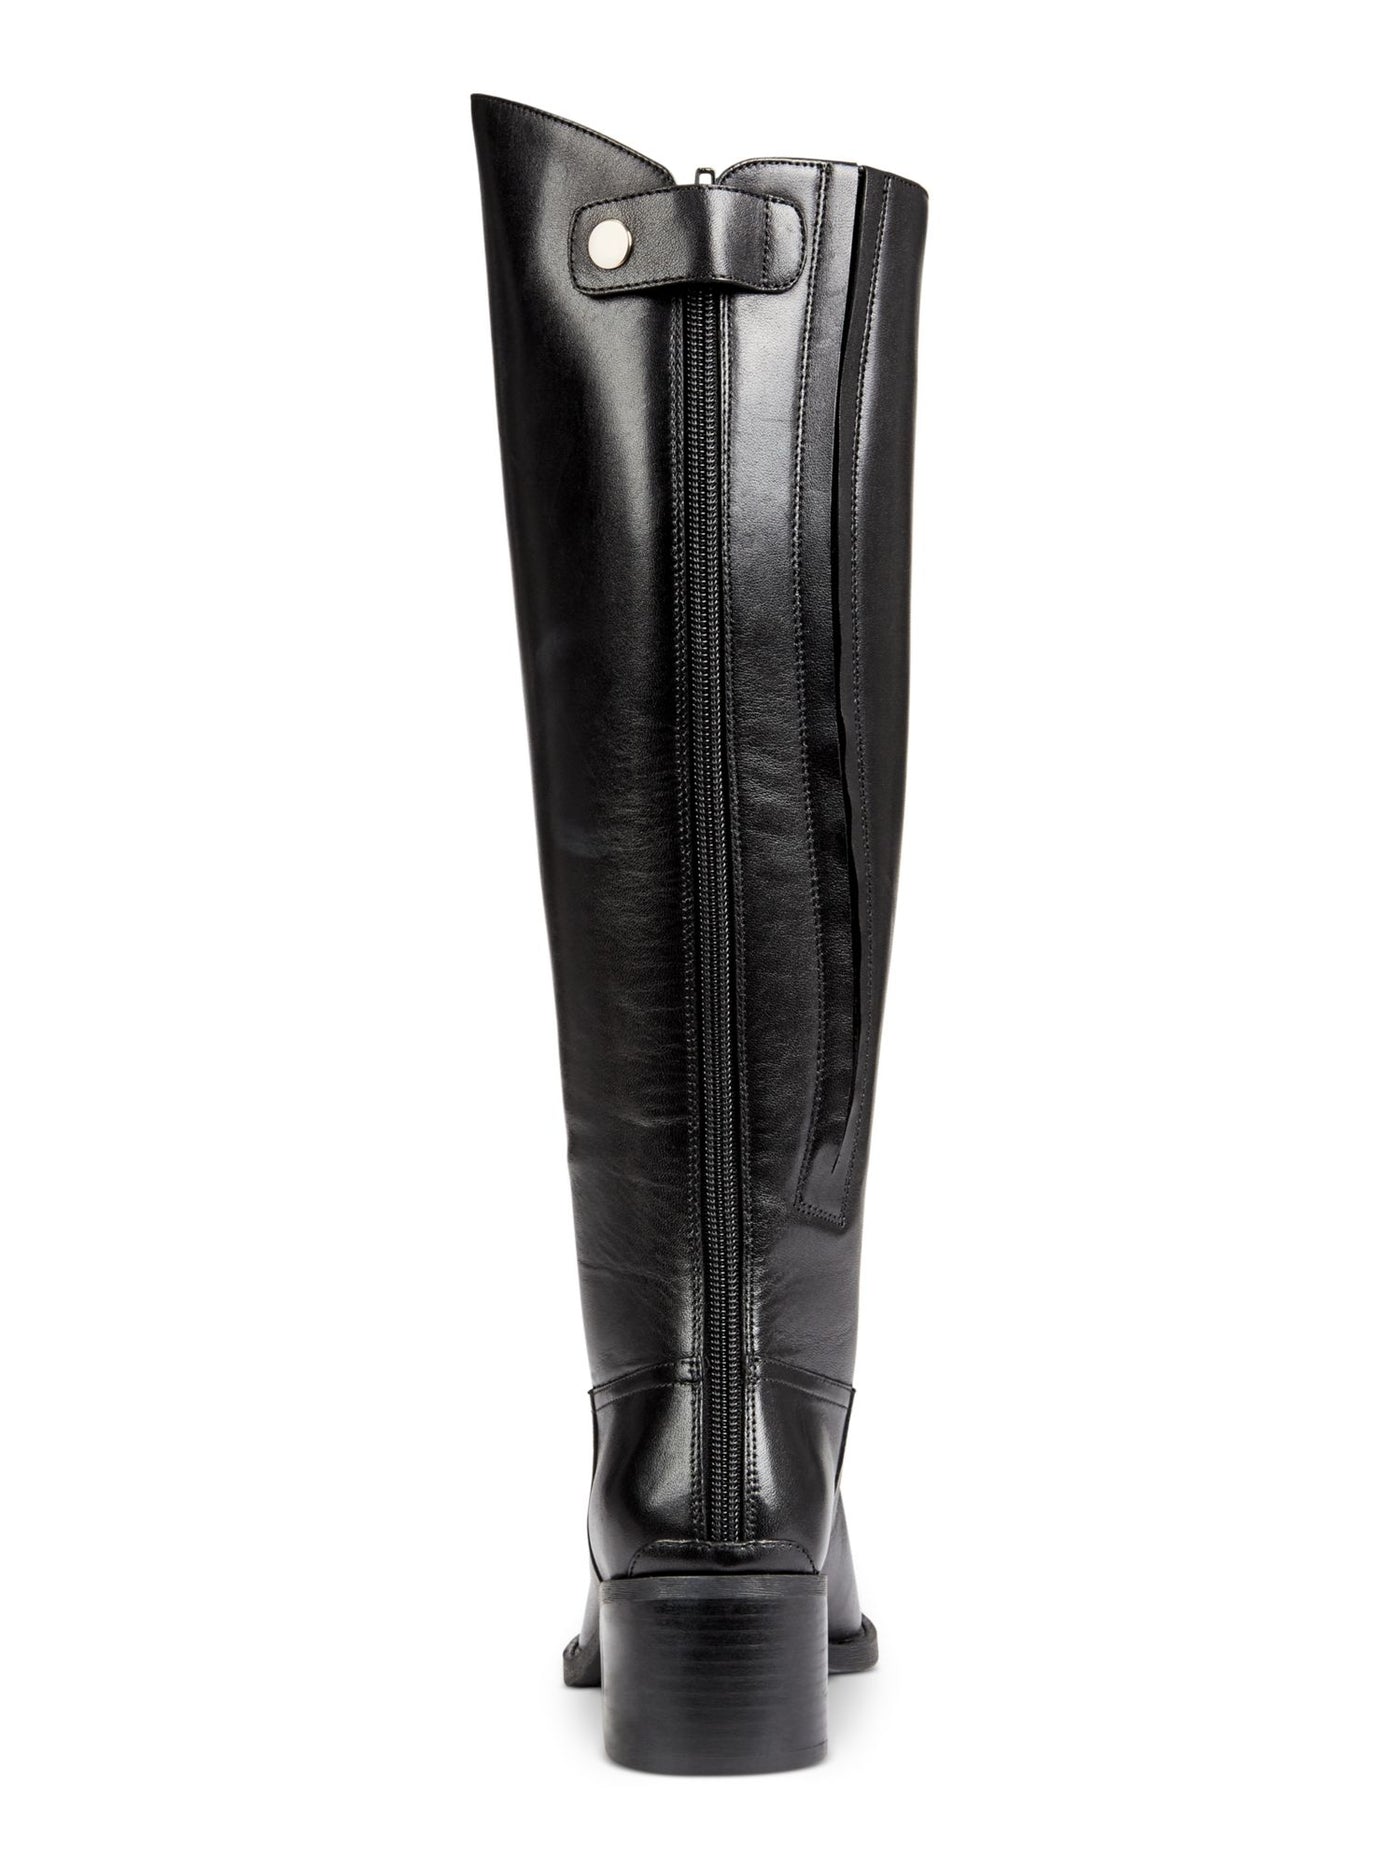 INC Womens Black Buckle Padded Almond Toe Block Heel Zip-Up Leather Riding Boot 6.5 M